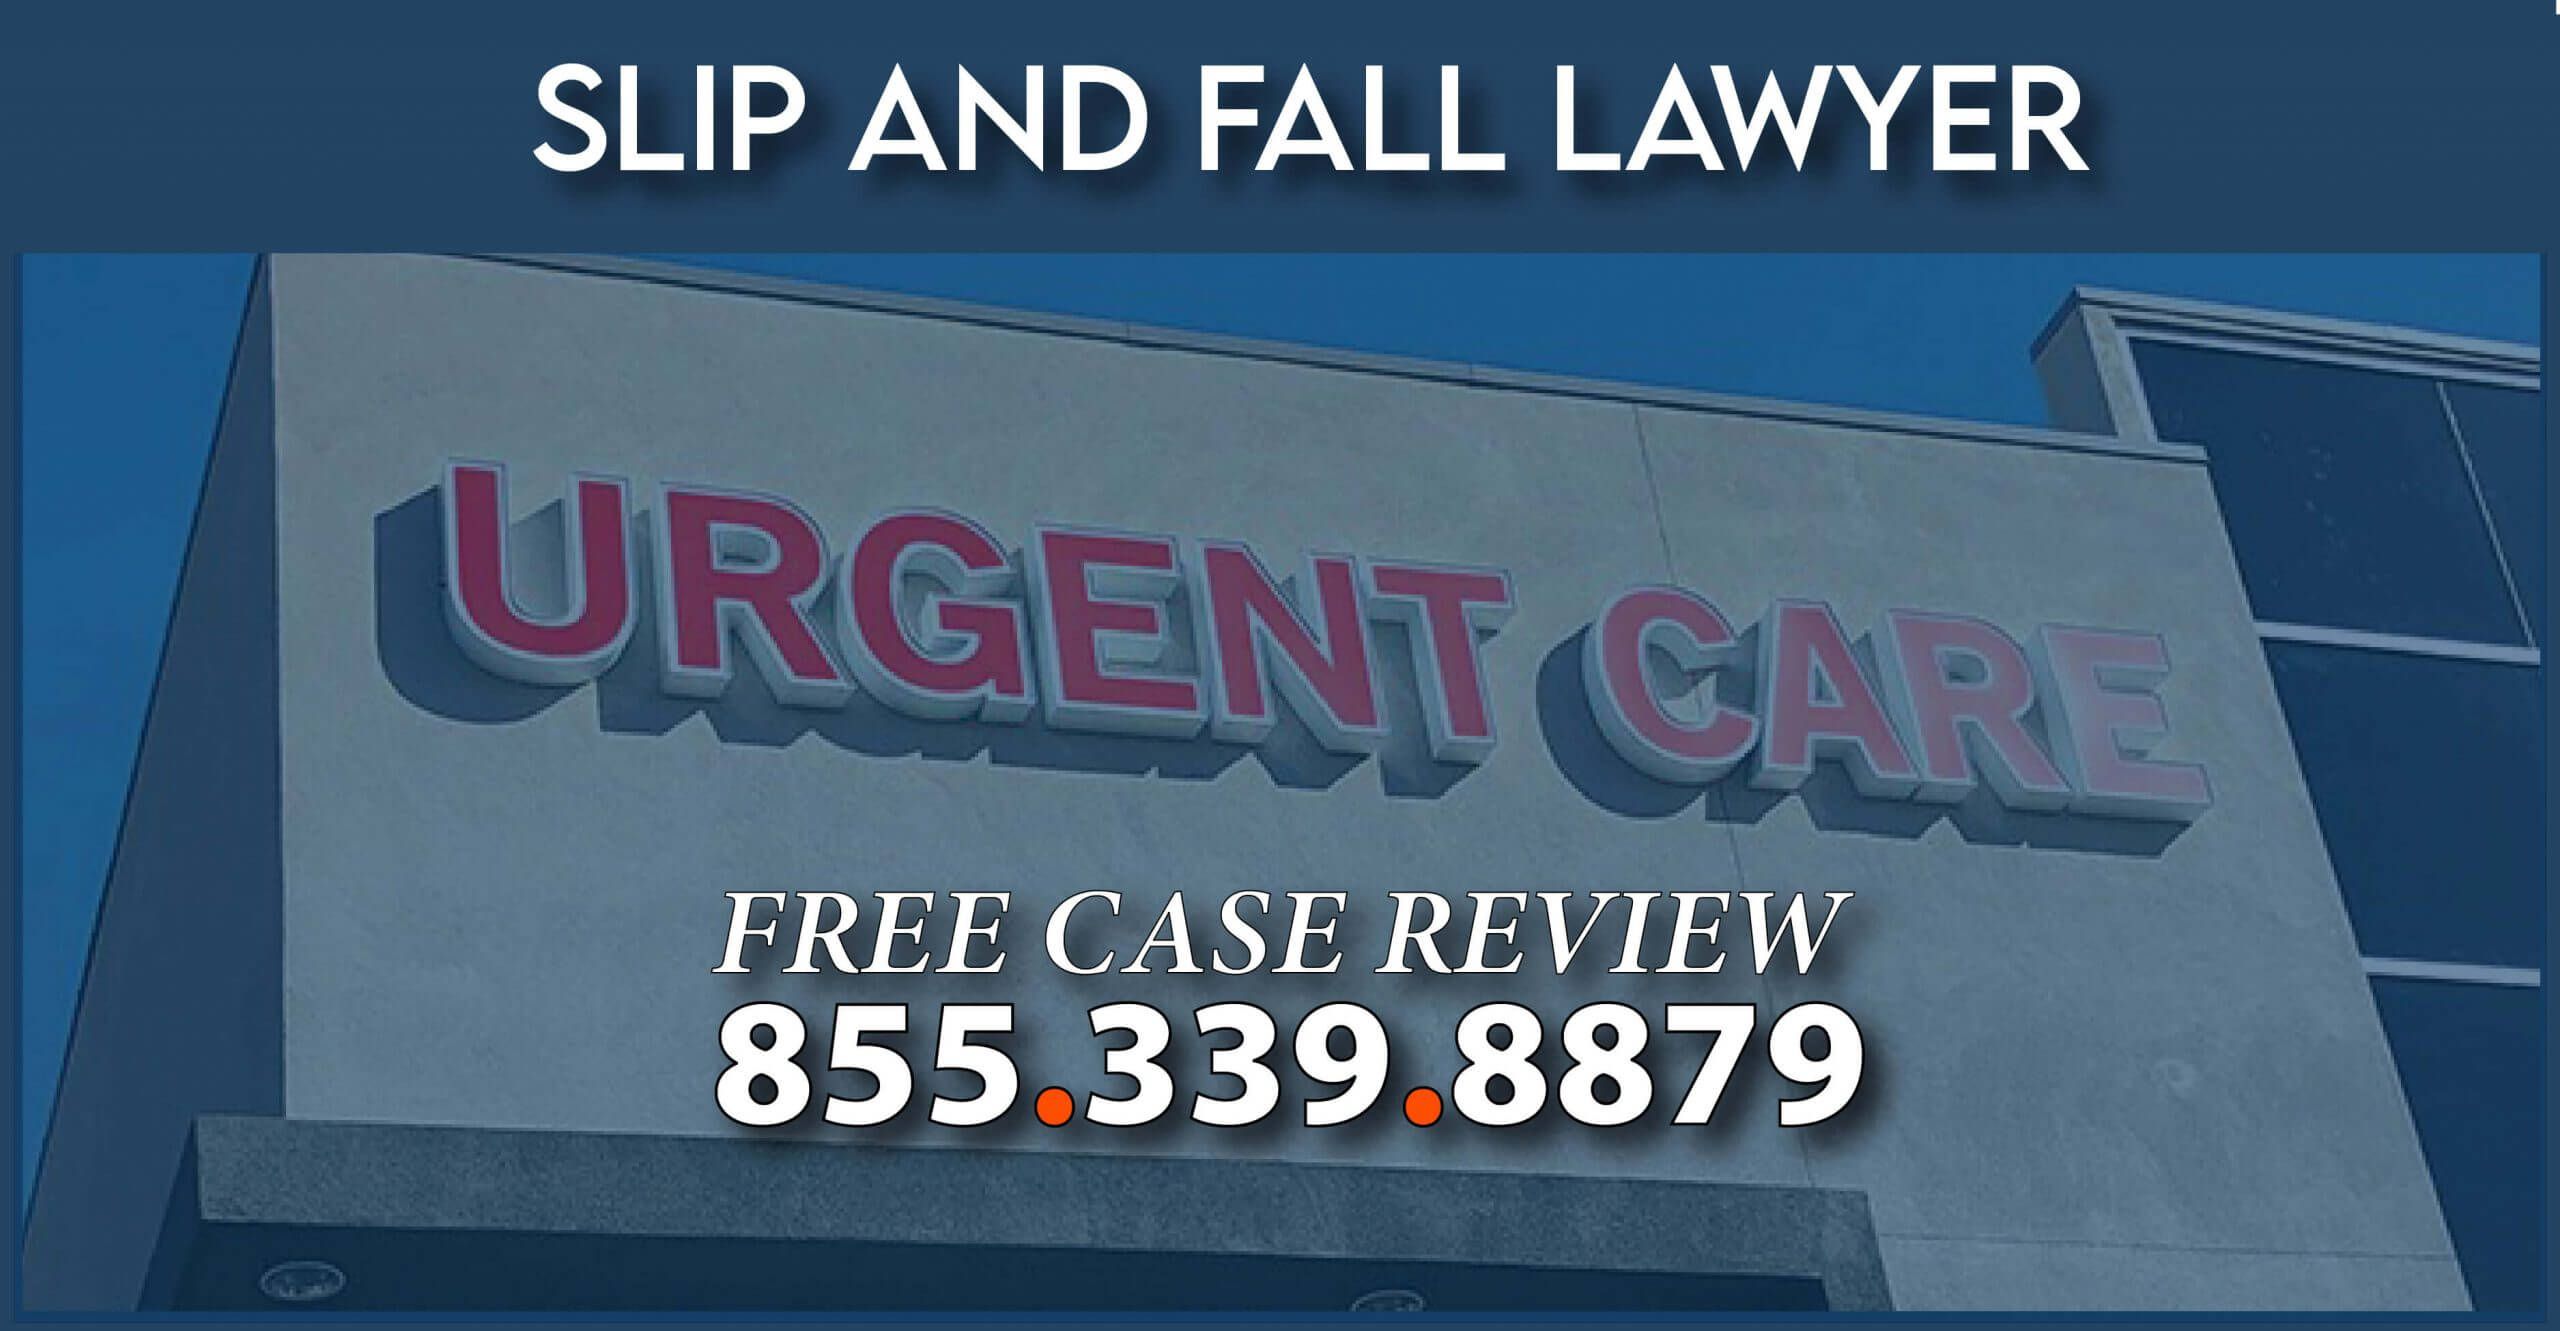 urgent care slip and fall lawyer bruise accident concussion sprain incident attorney sue compensation